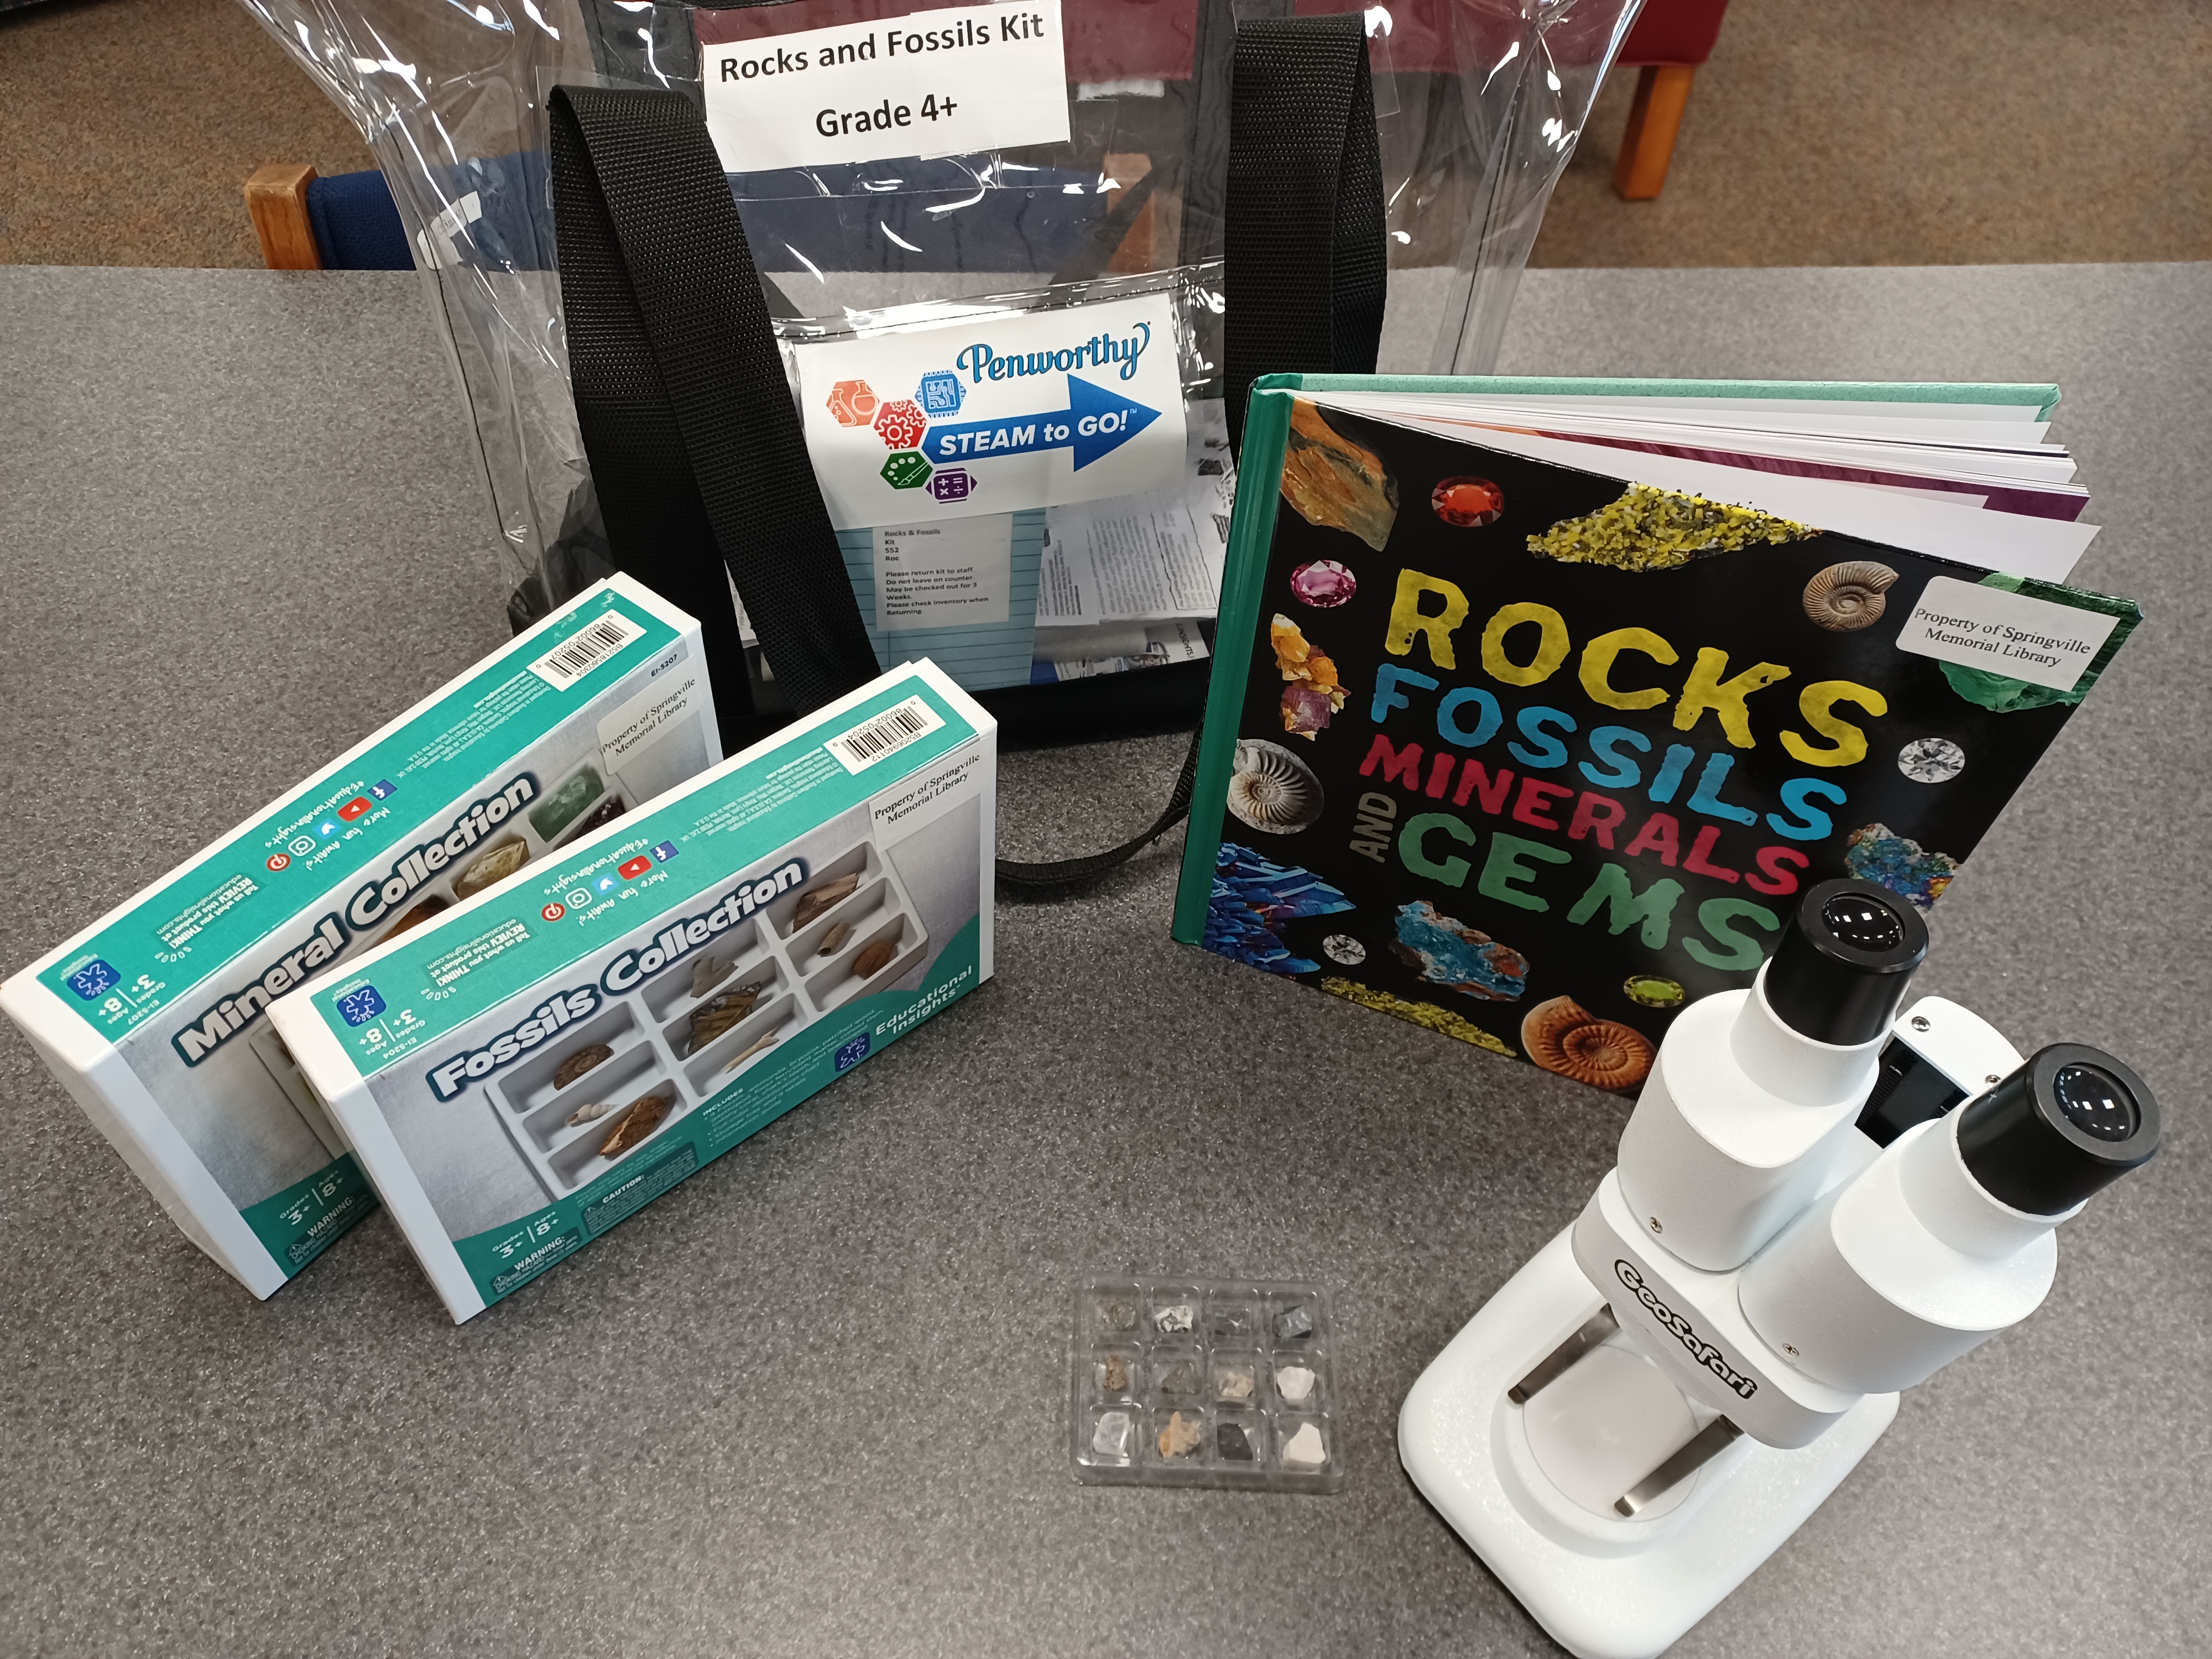 Check out our STEAM kits!